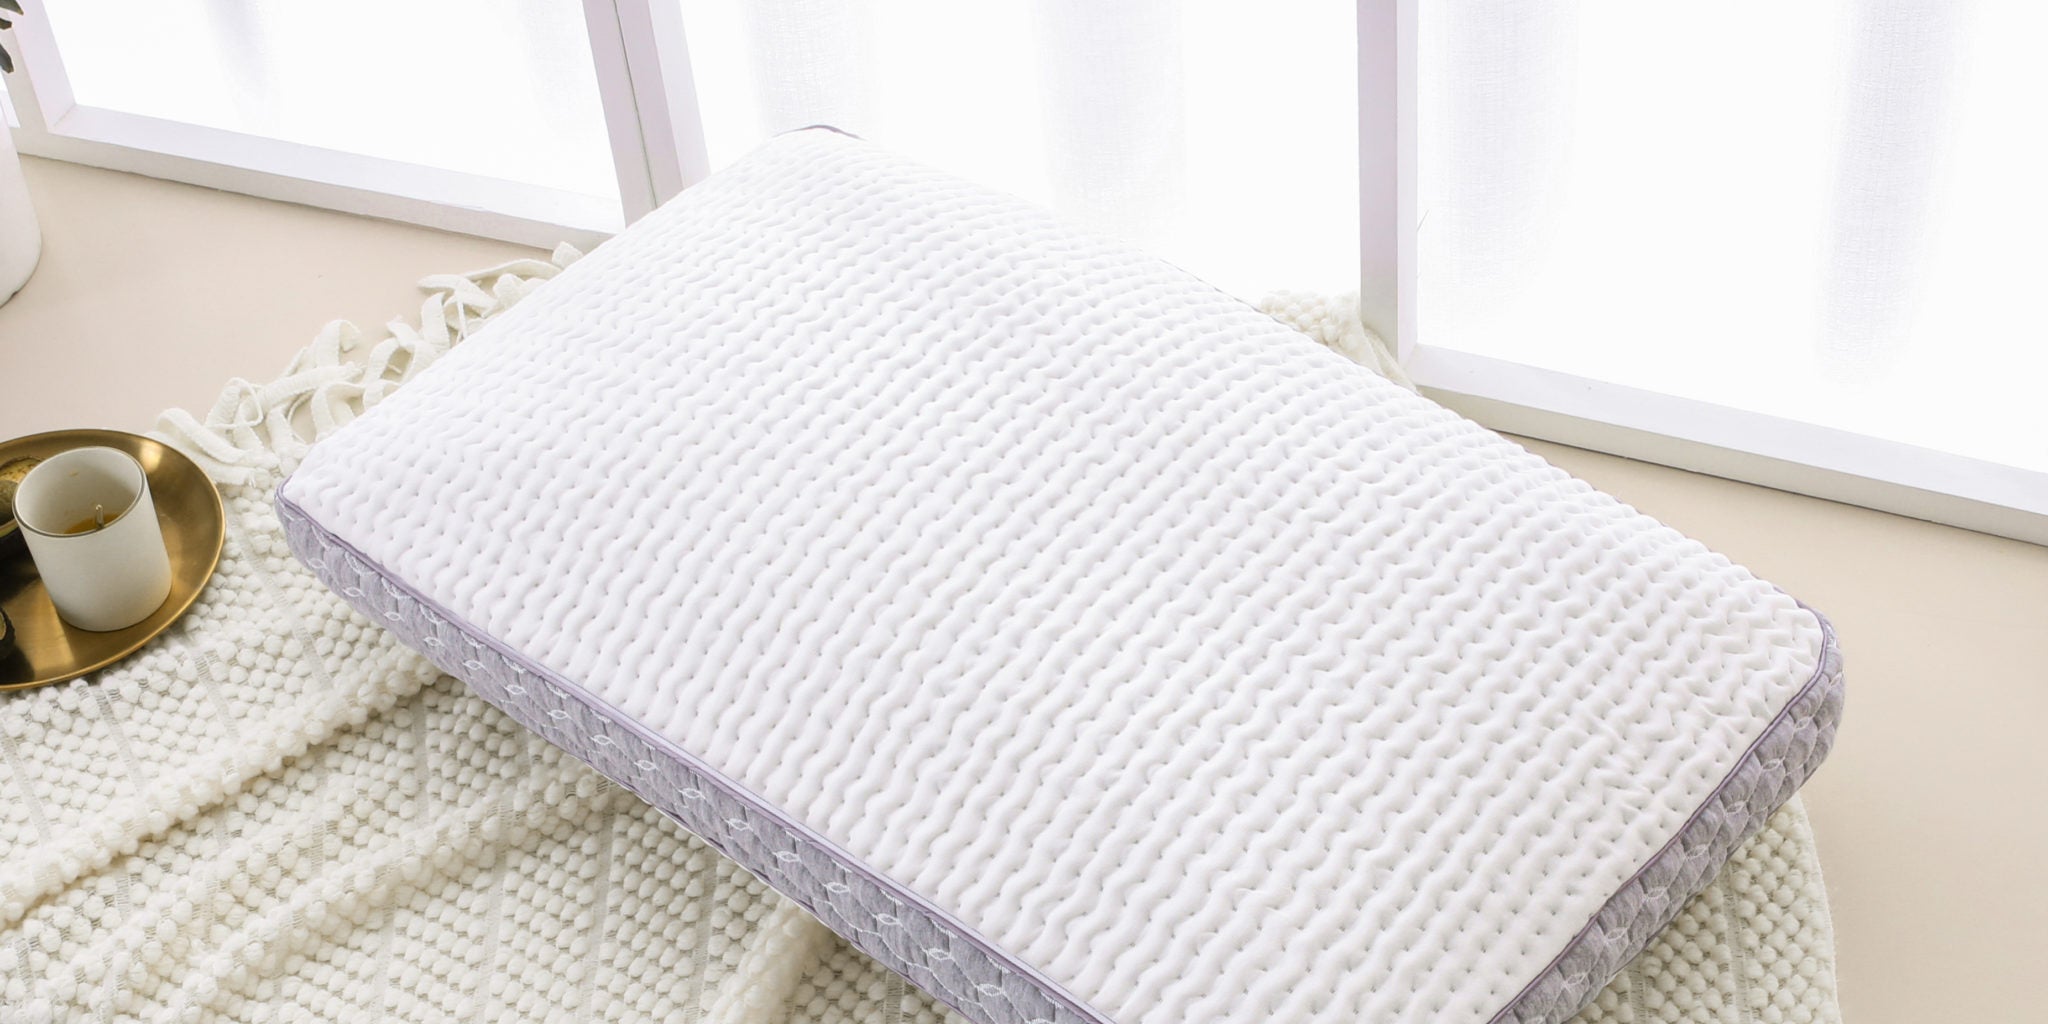 Image of Mlily BioRelax Pillow